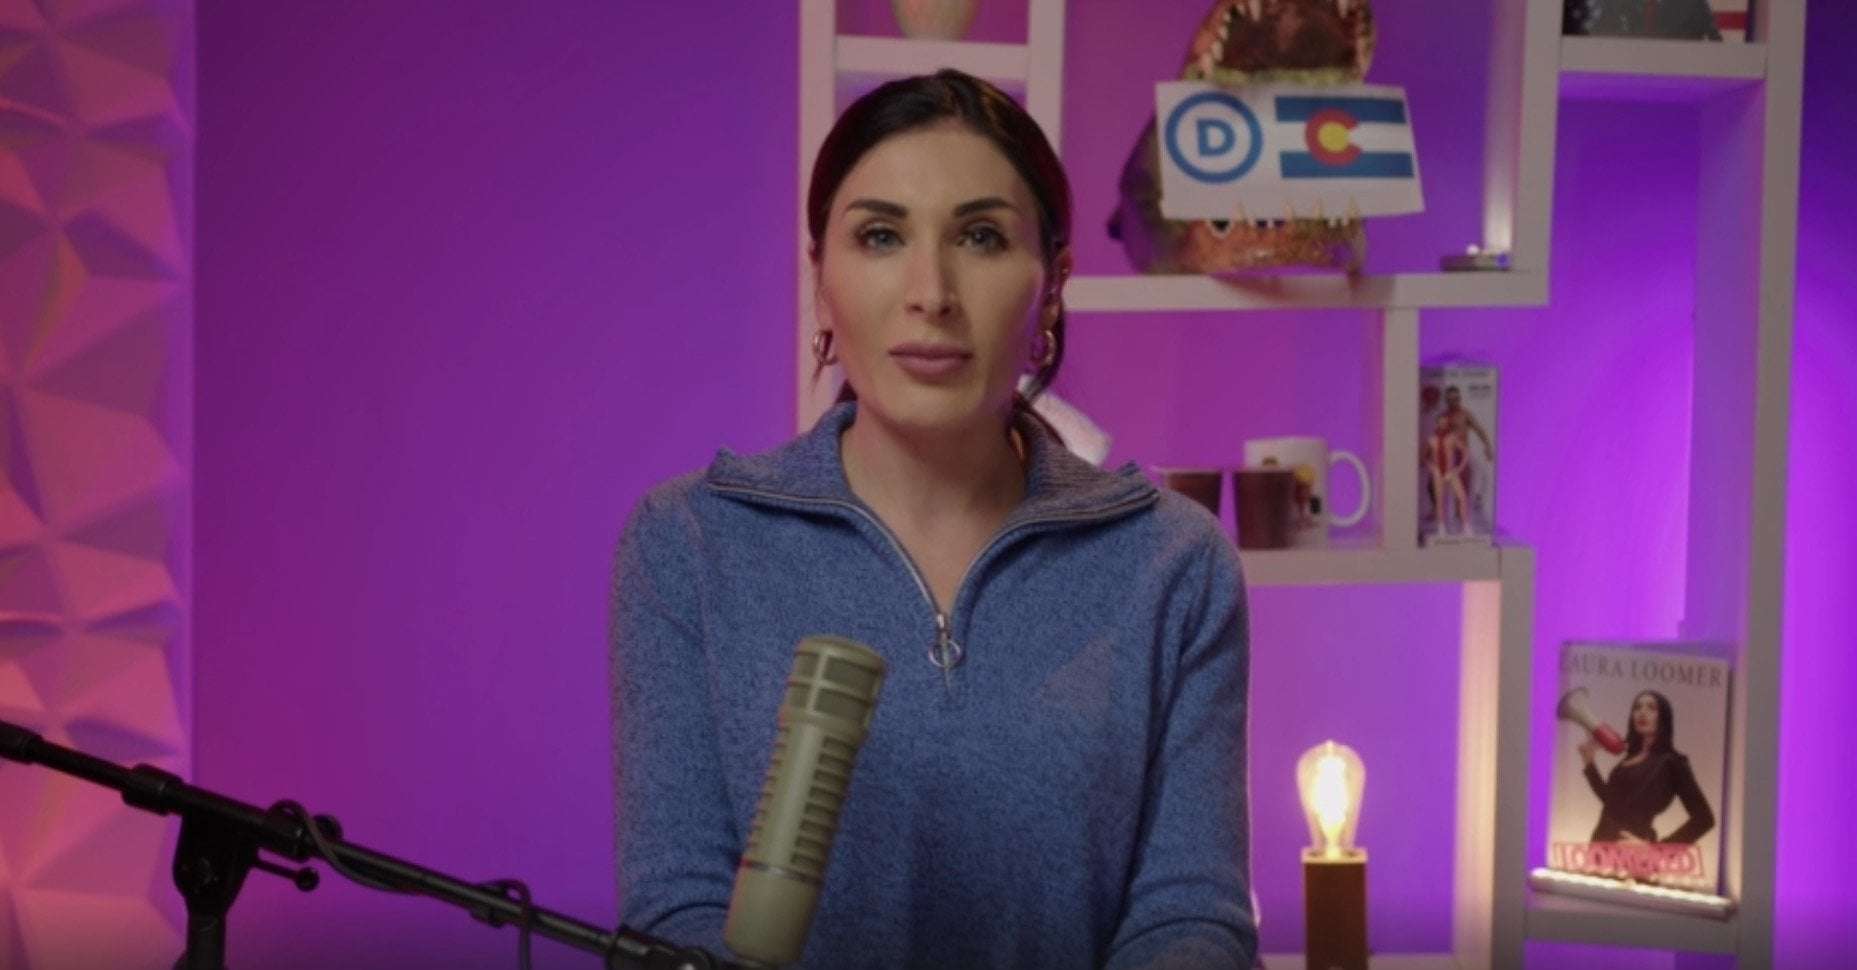 image for Trump ally Laura Loomer: Nikki Haley and the deep state might be using “weather manipulation” to “rig the Iowa Caucus”